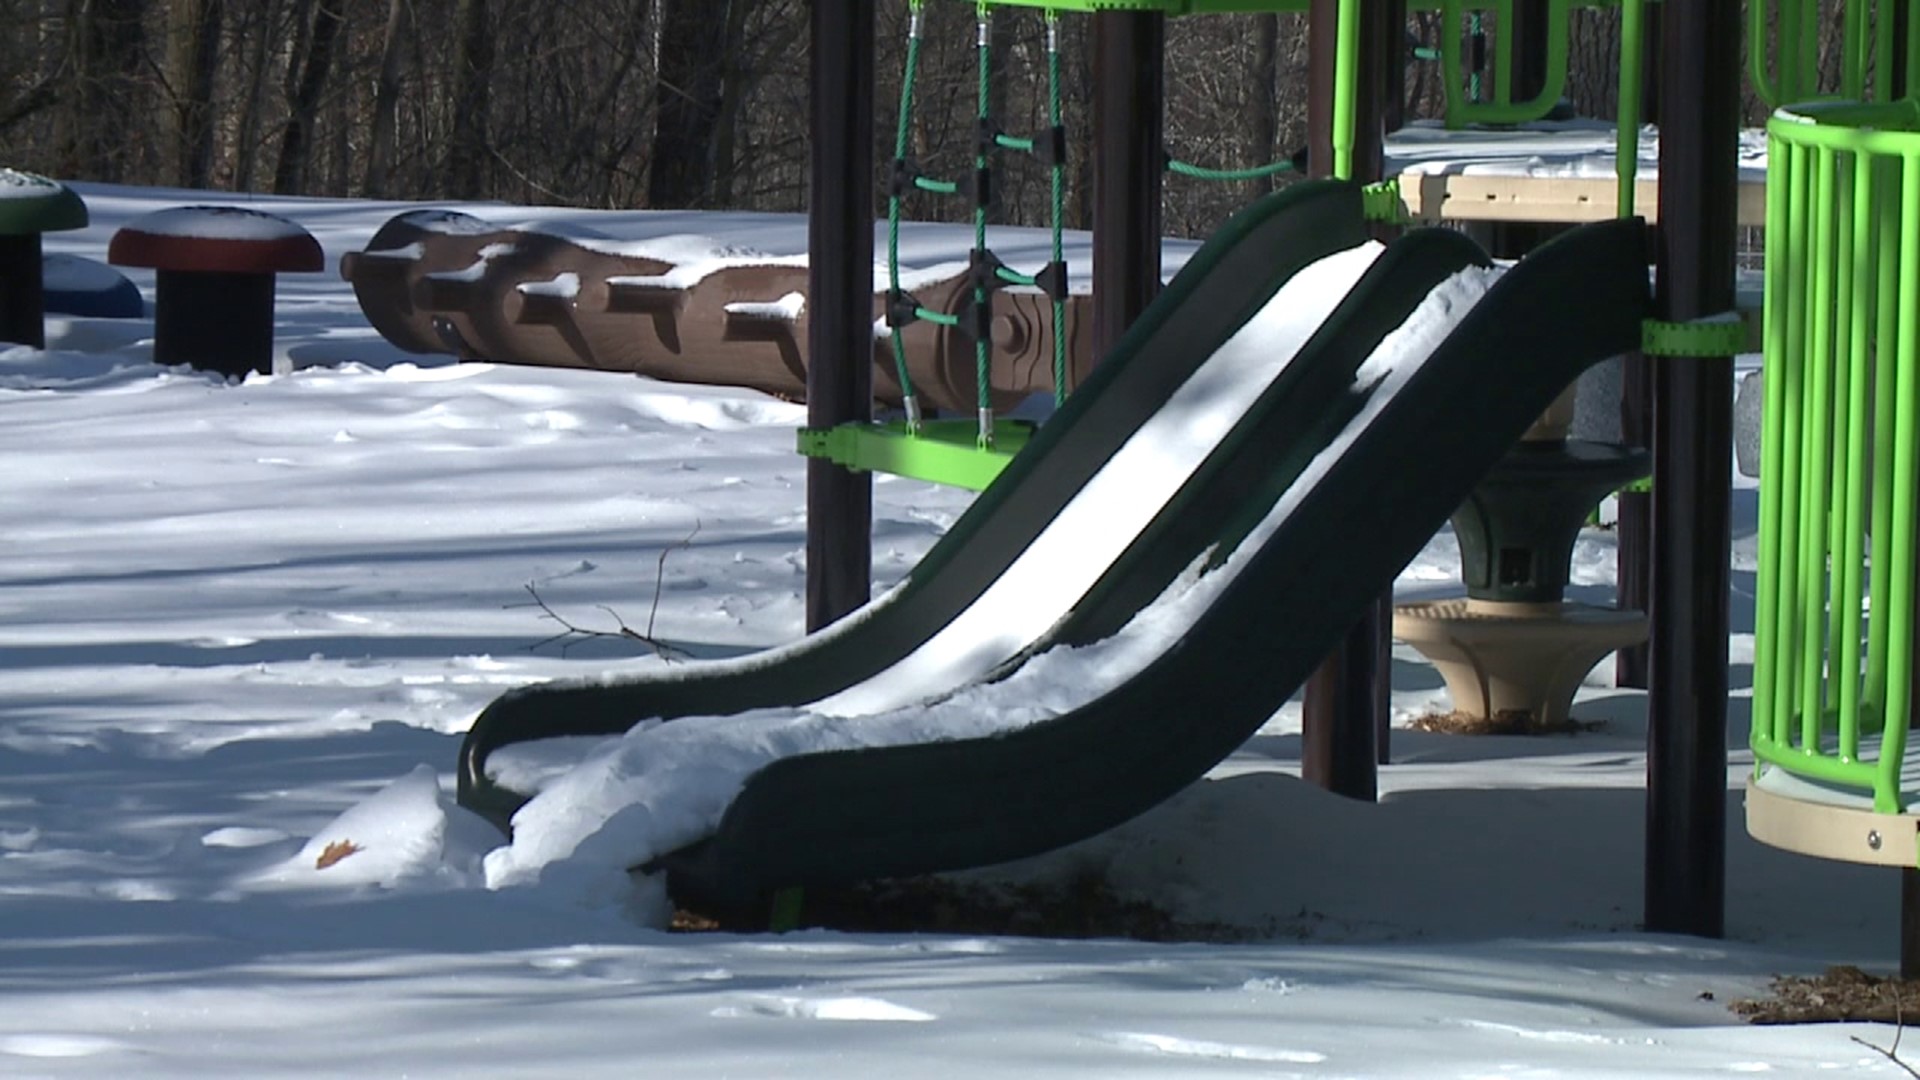 The survey benefits the future of Wright Township Municipal Park in Mountain Top.